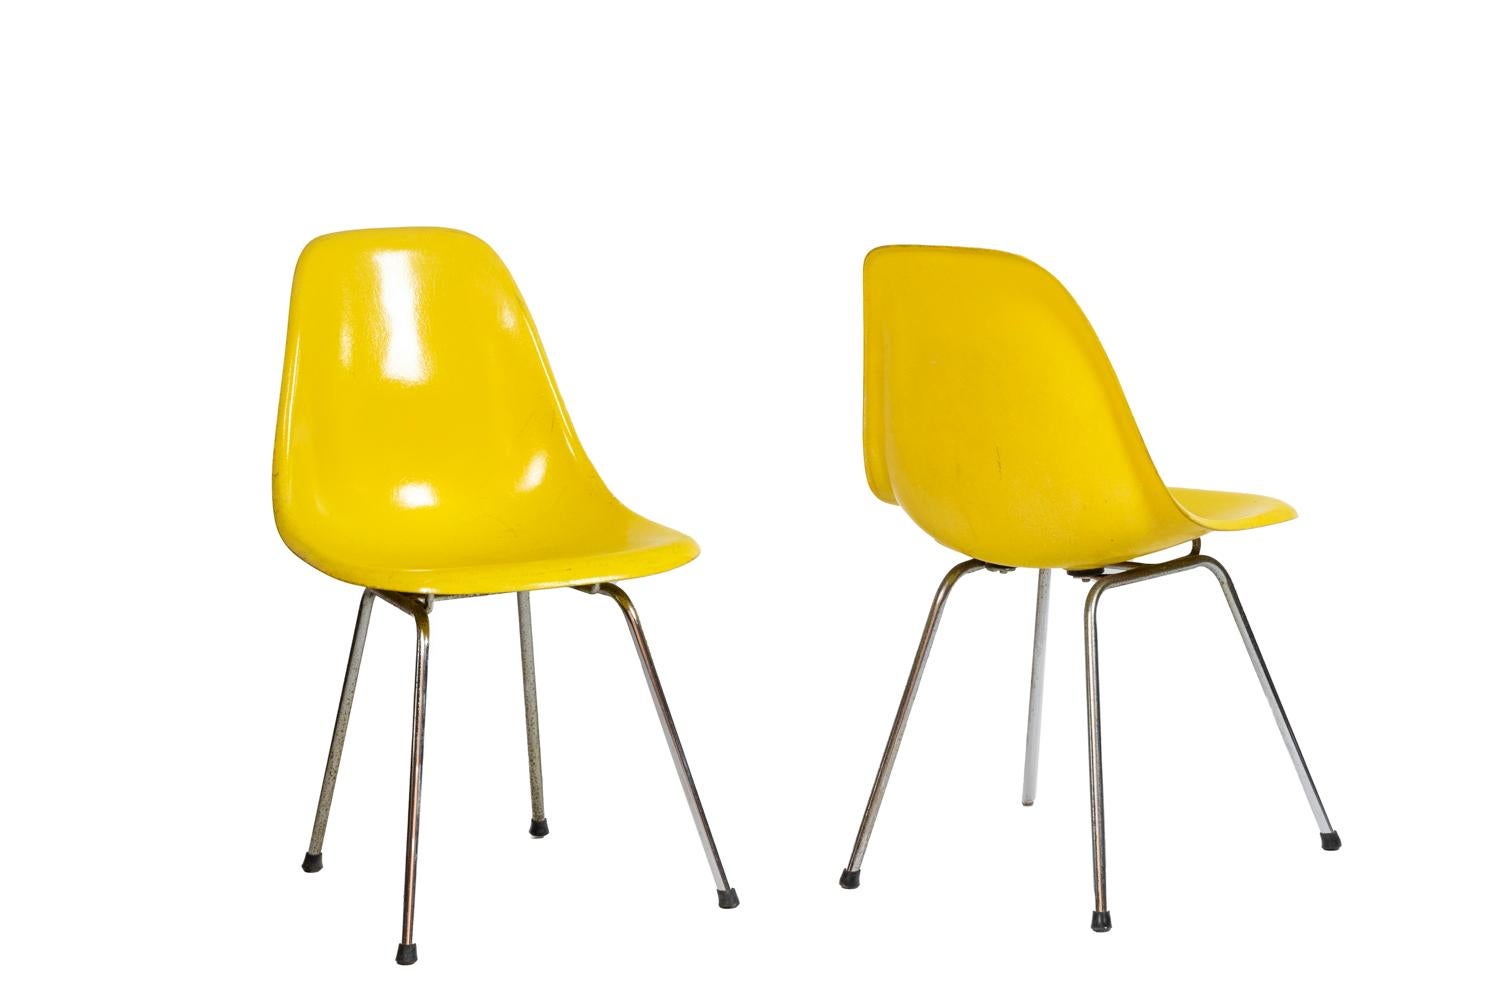 Series of six chairs in fiberglass, in yellow color. Base in chrome metal.

American work realized in the 1960.